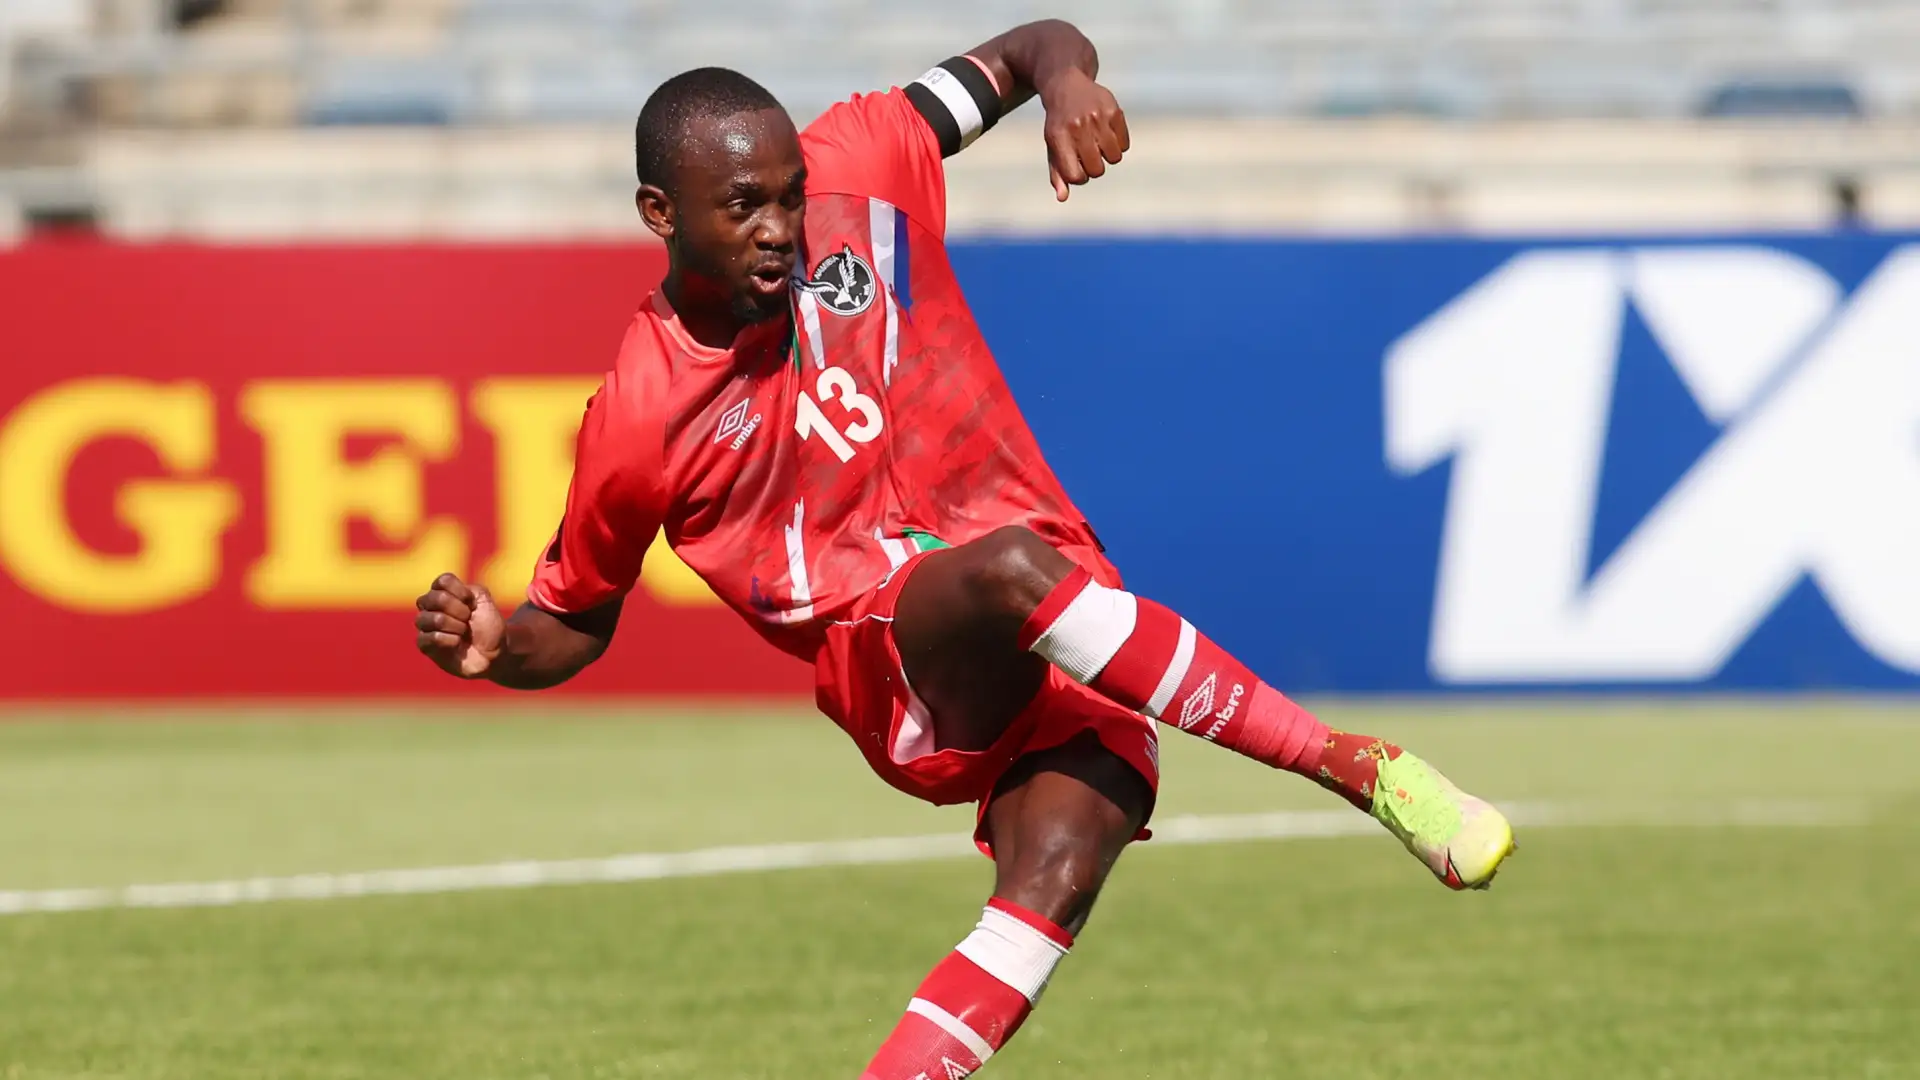 Caf Fifa World Cup Qualifiers Matchday 3 Wrap: Results for Kenya, Tunisia, Congo, Rwanda, Senegal and many more as competition intensifies